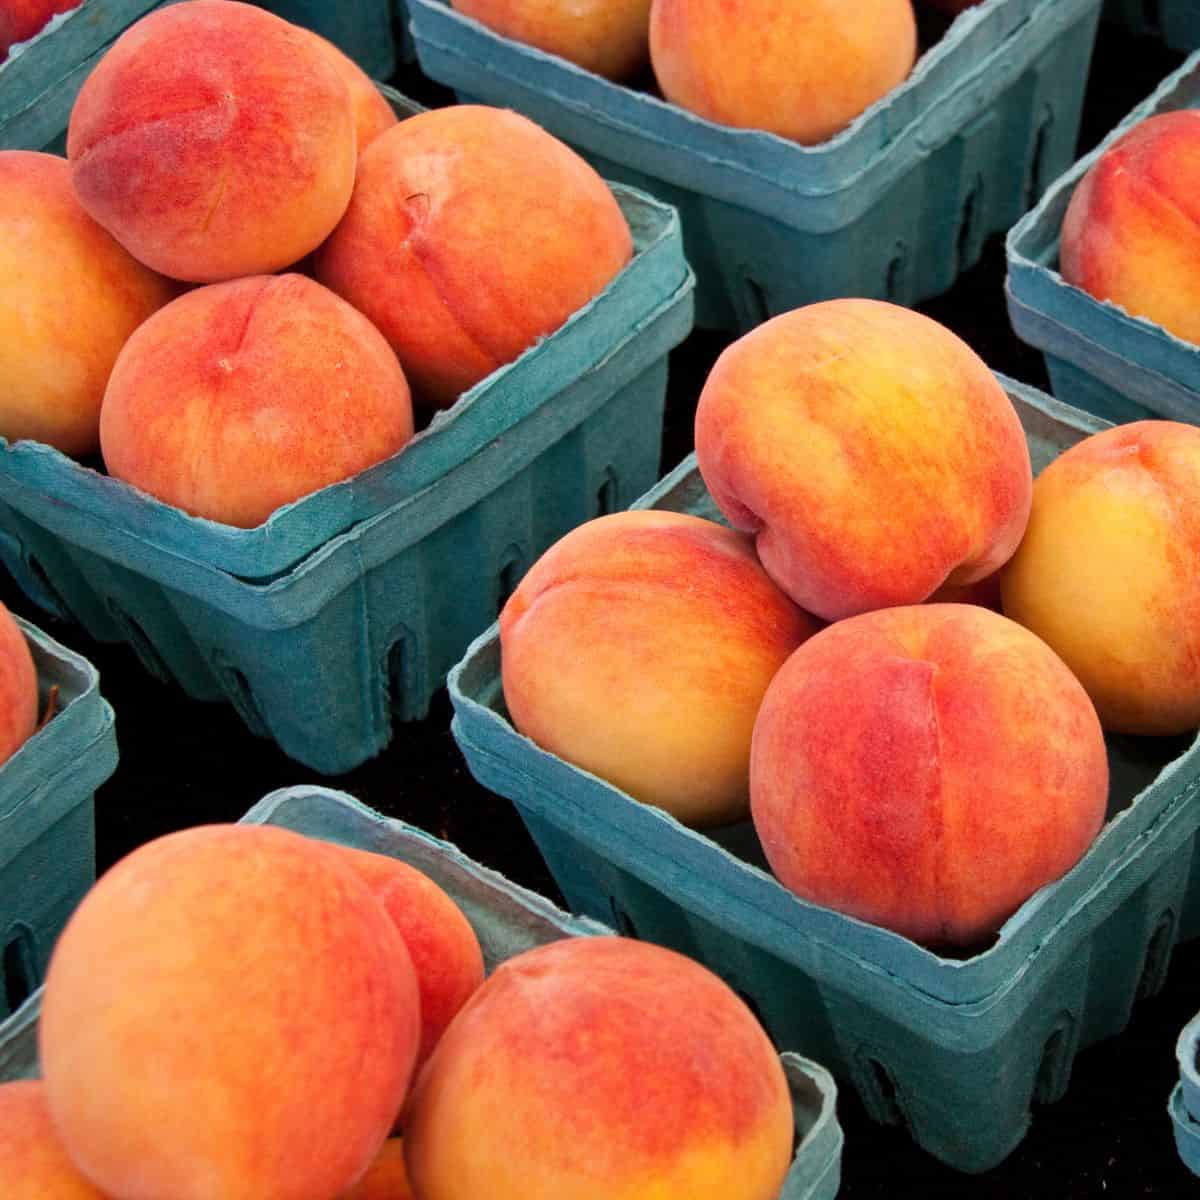 Fresh peaches in the store.